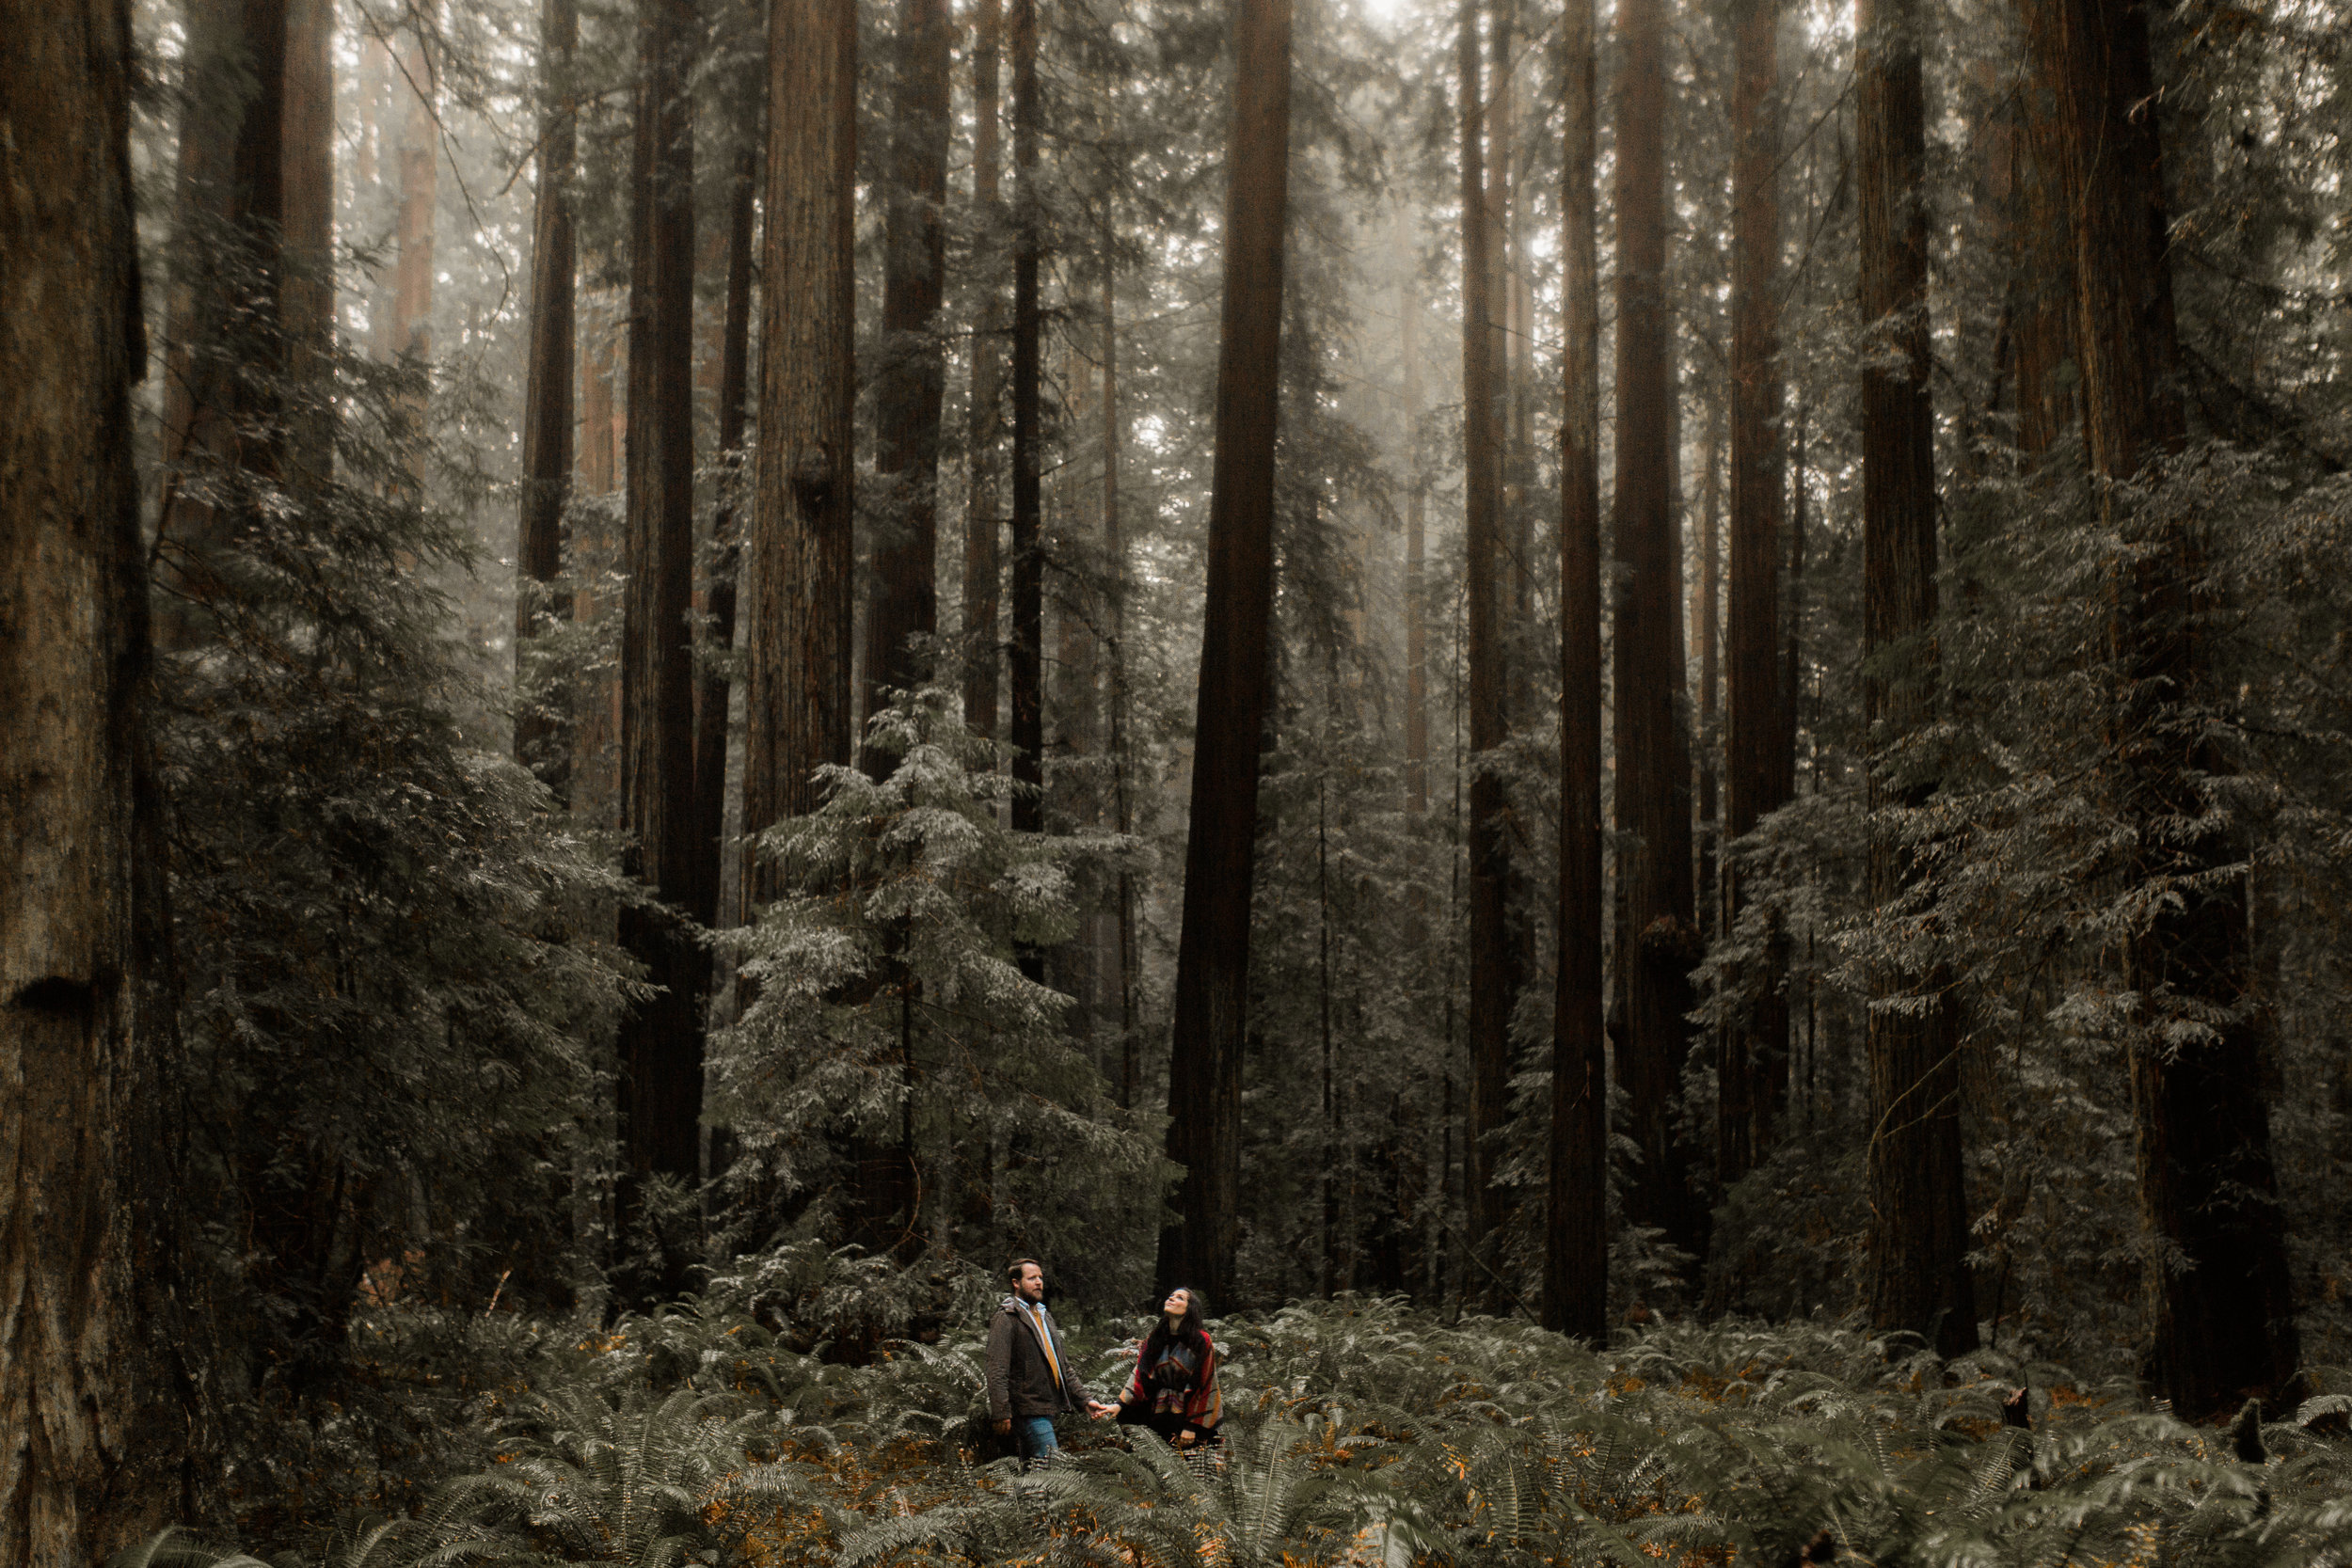 nicole-daacke-photography-redwoods-national-park-forest-rainy-foggy-adventure-engagement-session-humboldt-county-old-growth-redwood-tree-elopement-intimate-wedding-photographer-24.jpg